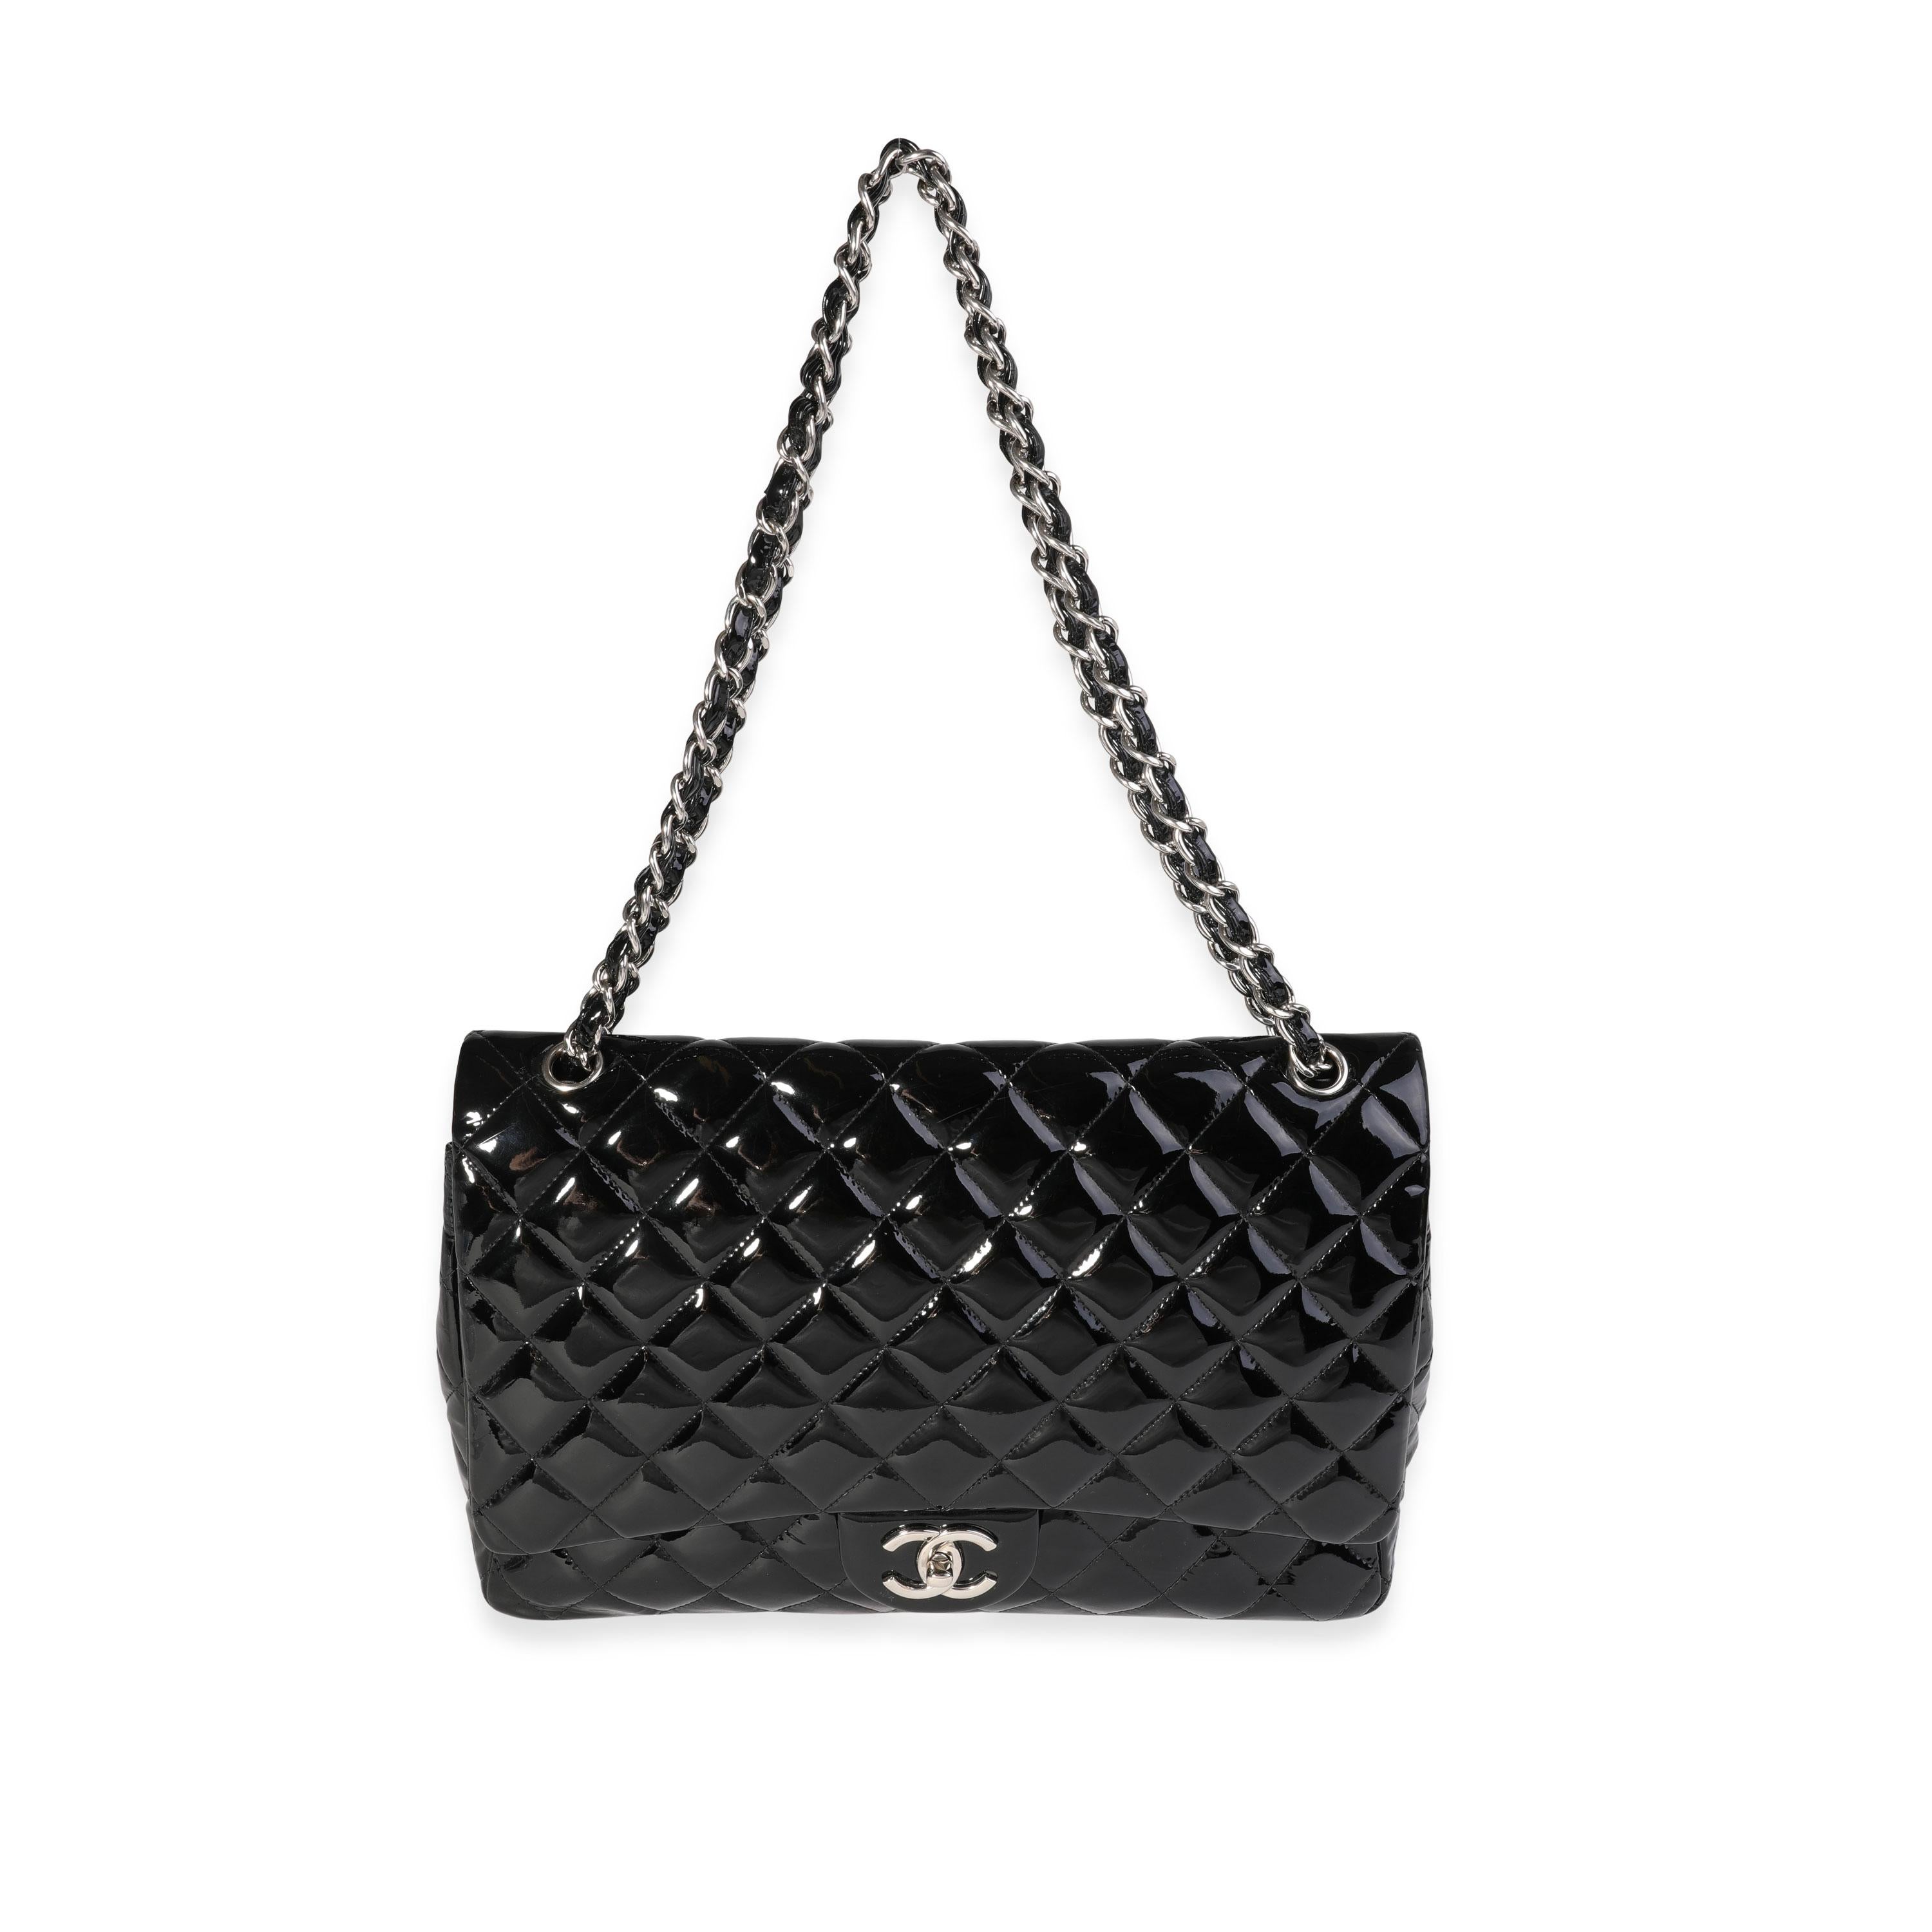 Listing Title: Chanel Black Quilted Patent Leather Maxi Classic Double Flap Bag
SKU: 121325
MSRP: 10000.00
Condition: Pre-owned 
Handbag Condition: Good
Condition Comments: Good Condition. Scuffing to corners and throughout exterior. Scratching to